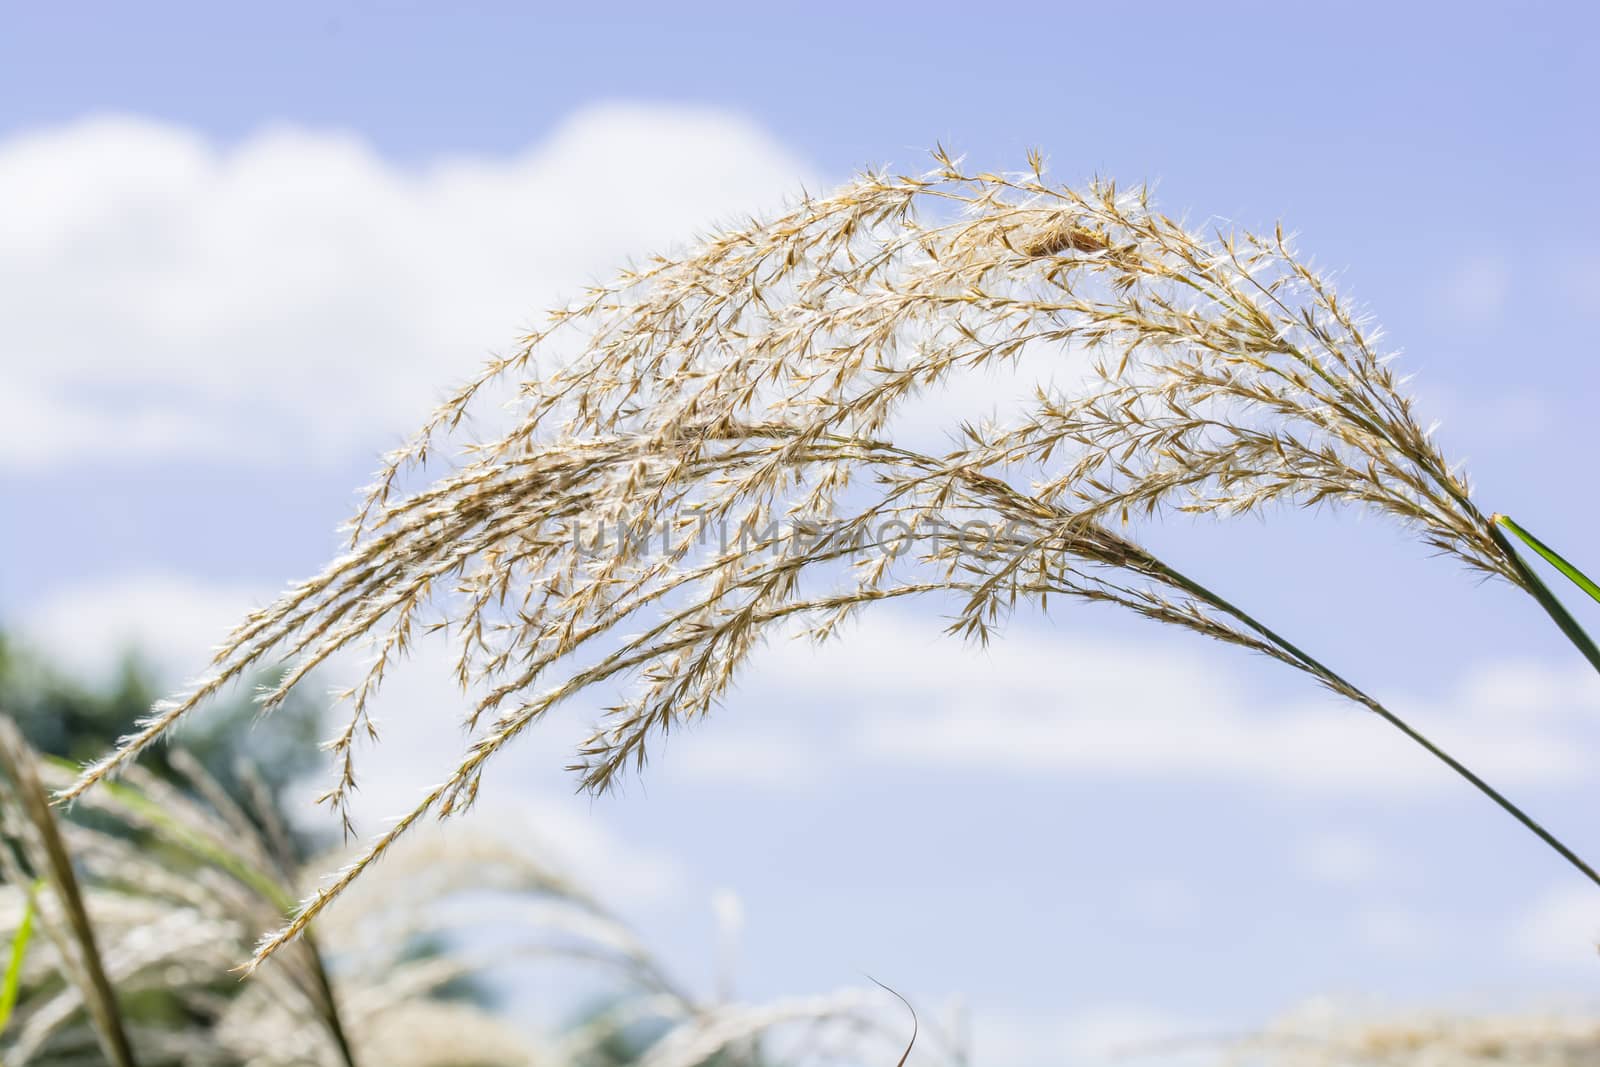 The beautiful dry grass flower under the gorgeous blue sky